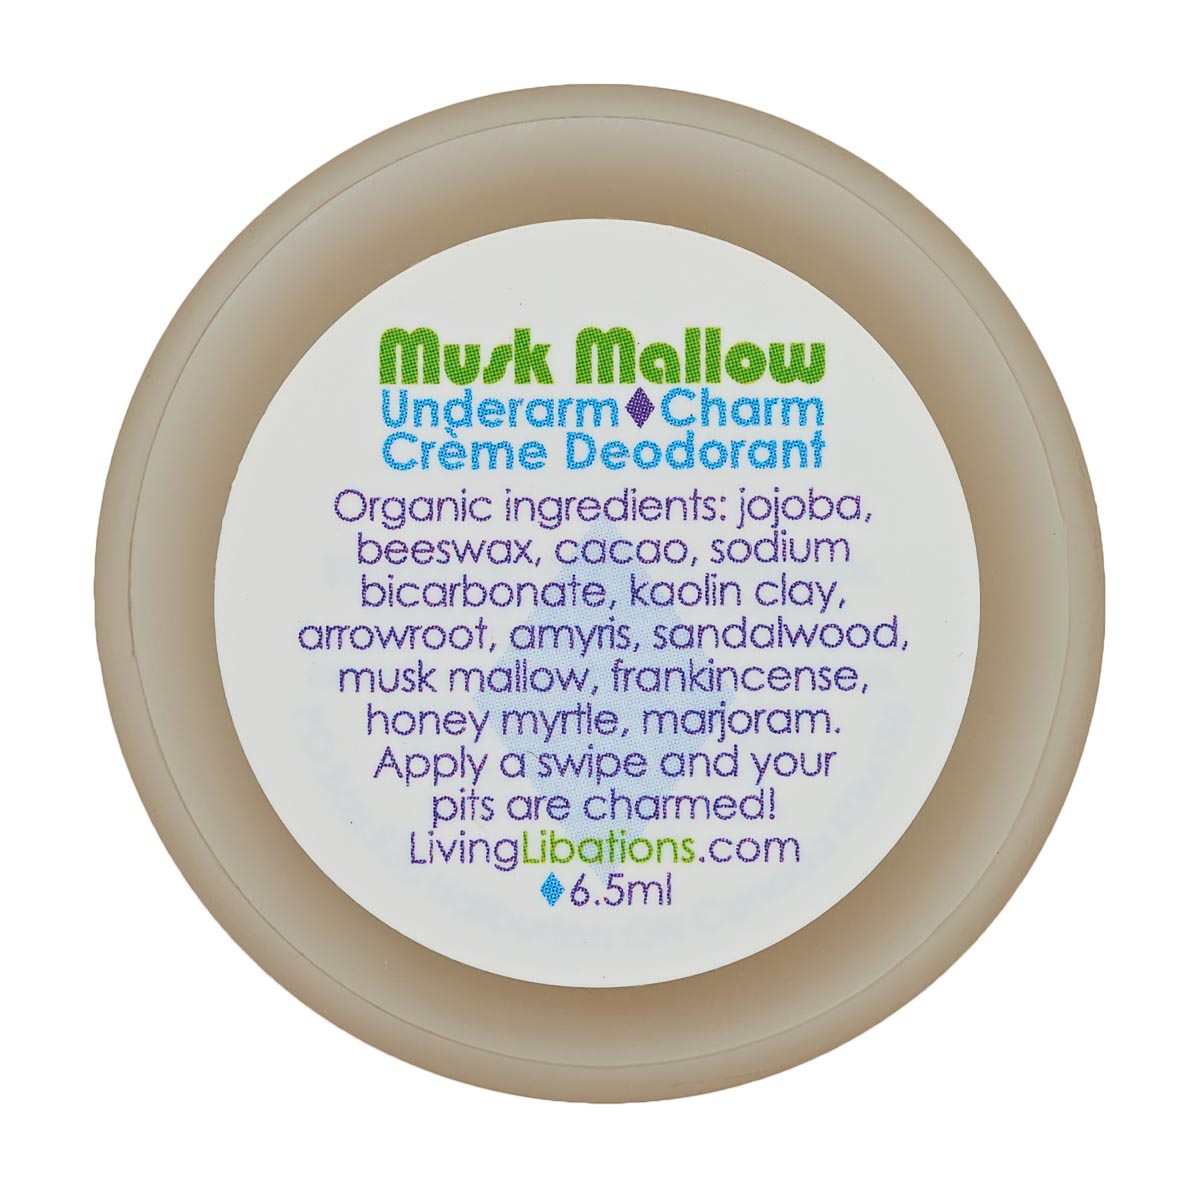 Musk Mallow Underarm Charm Crème Deodorant | Living Libations | Raw Living UK | Skin Care | Living Libations Musk Mallow Underarm Charm Crème Deodorant (6, 30ml): a Natural &amp; Vegan Cream made with Mallow, Frankincense, Sandalwood &amp; Bicarbonate of Soda.